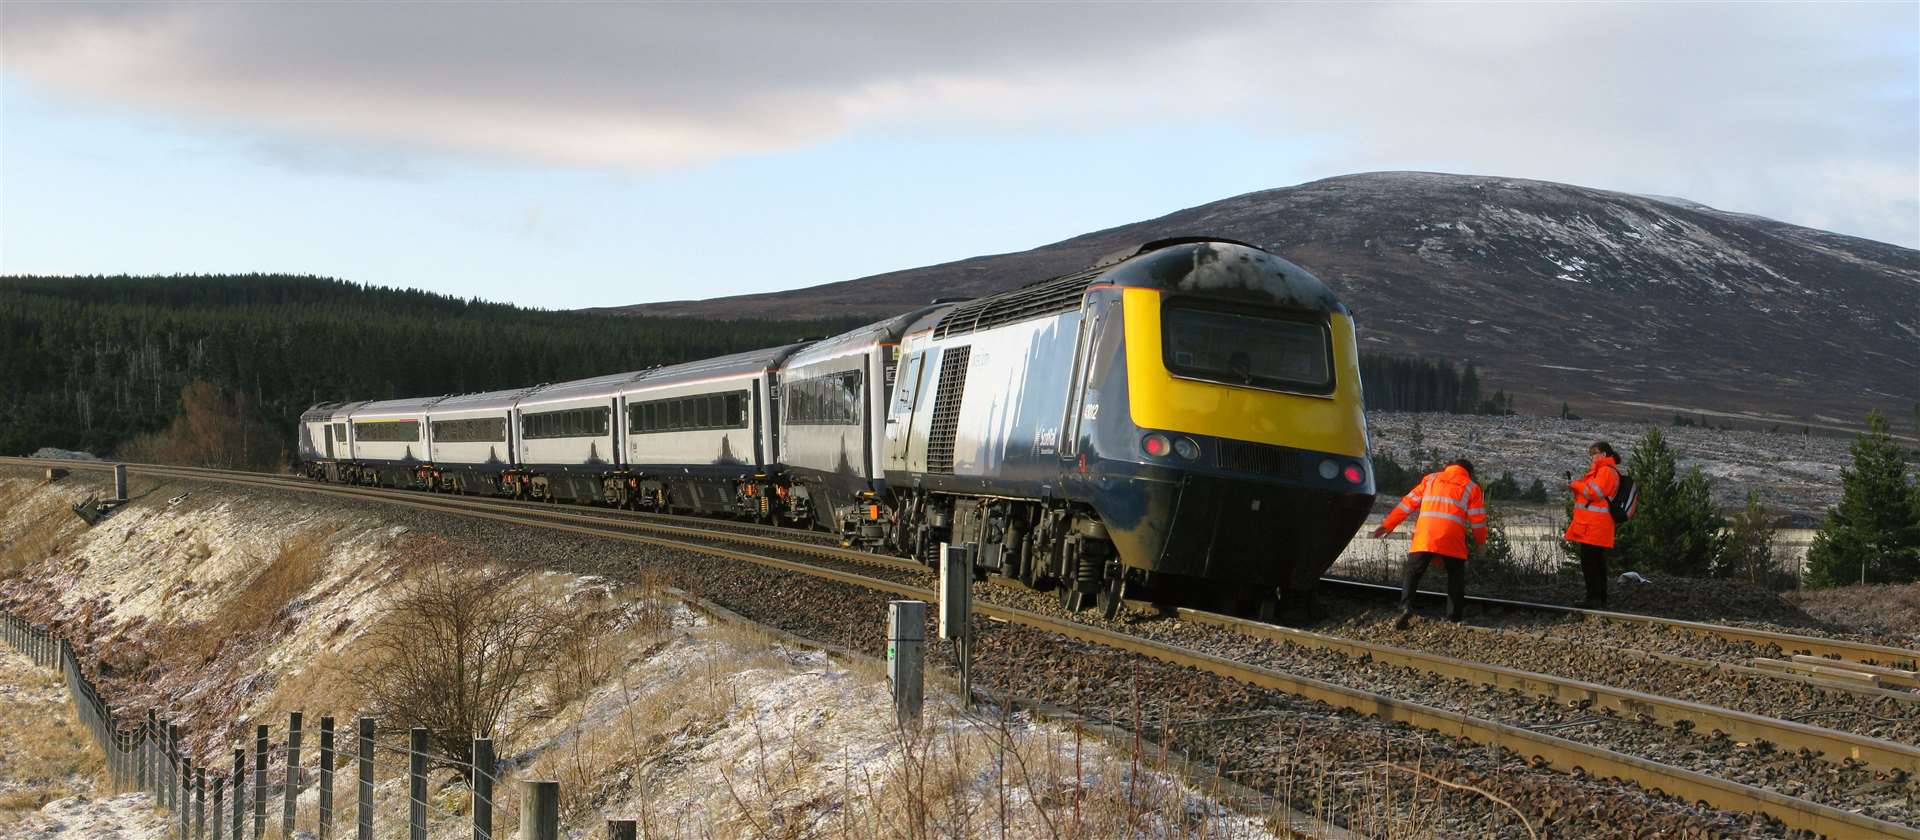 The RAIB has concluded that a signal wiring failure lead to the derailment by Dalwhinnie.